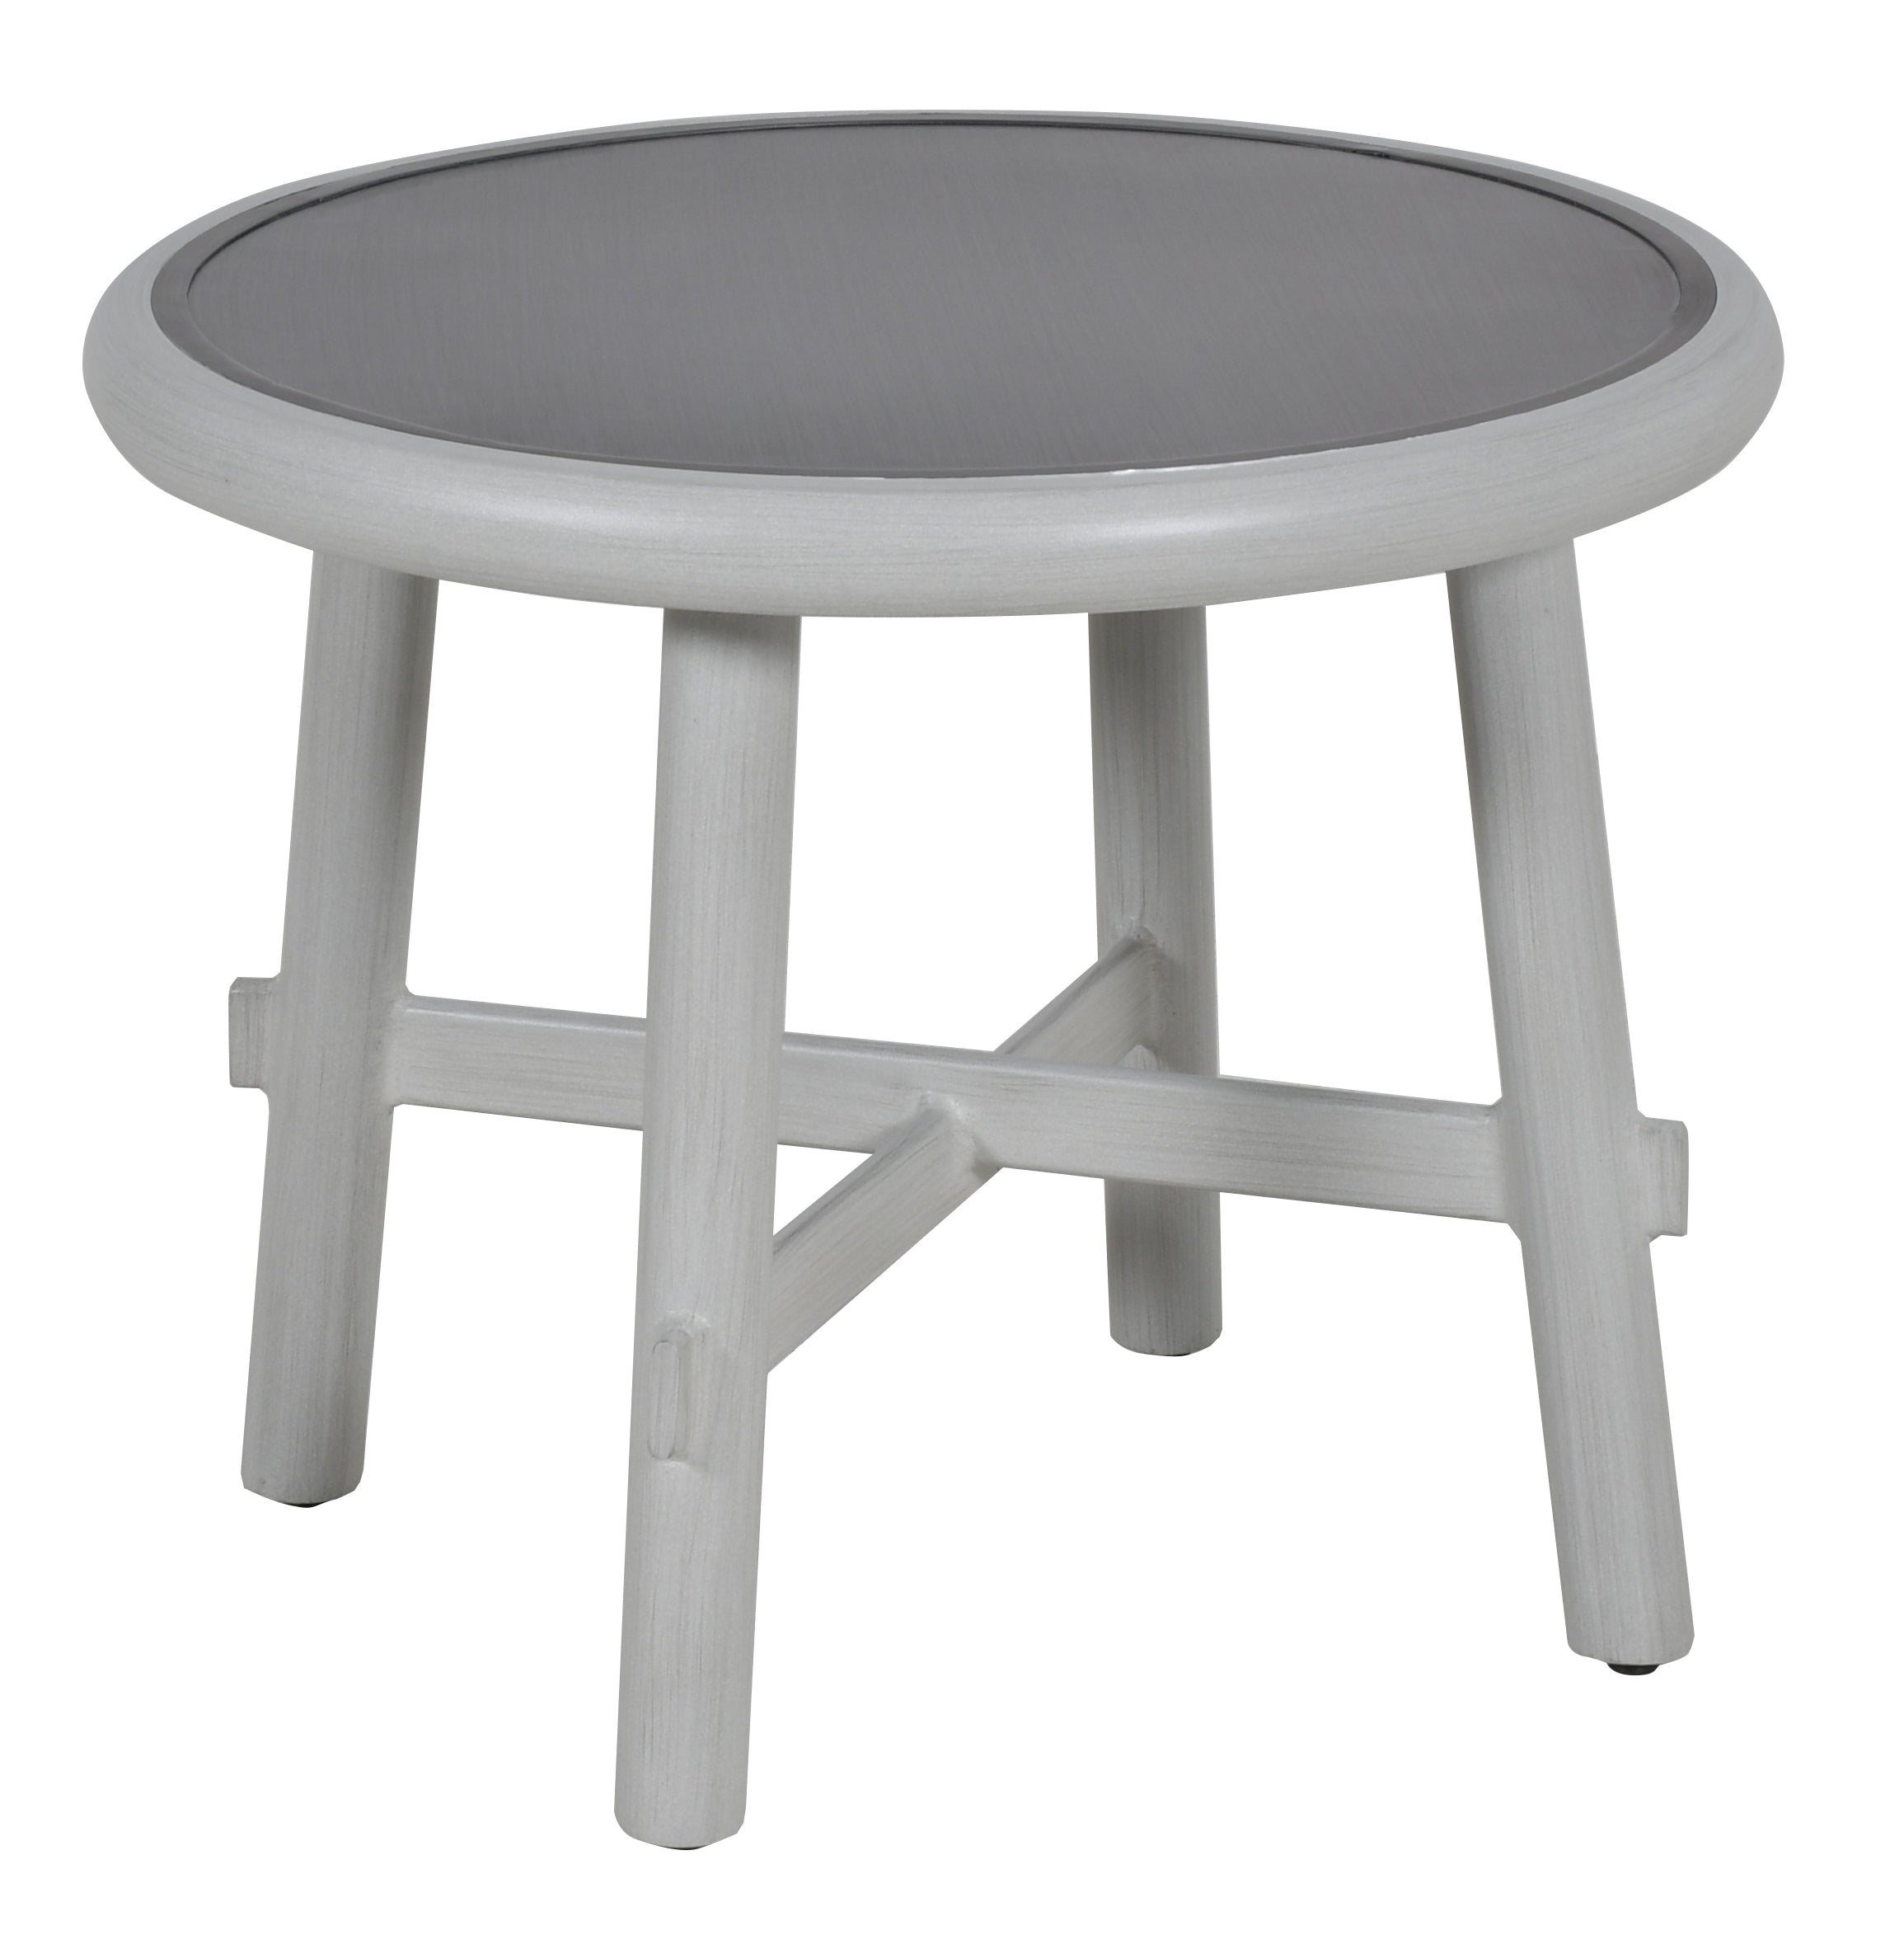 Barbados 24" Round Side Table By Castelle